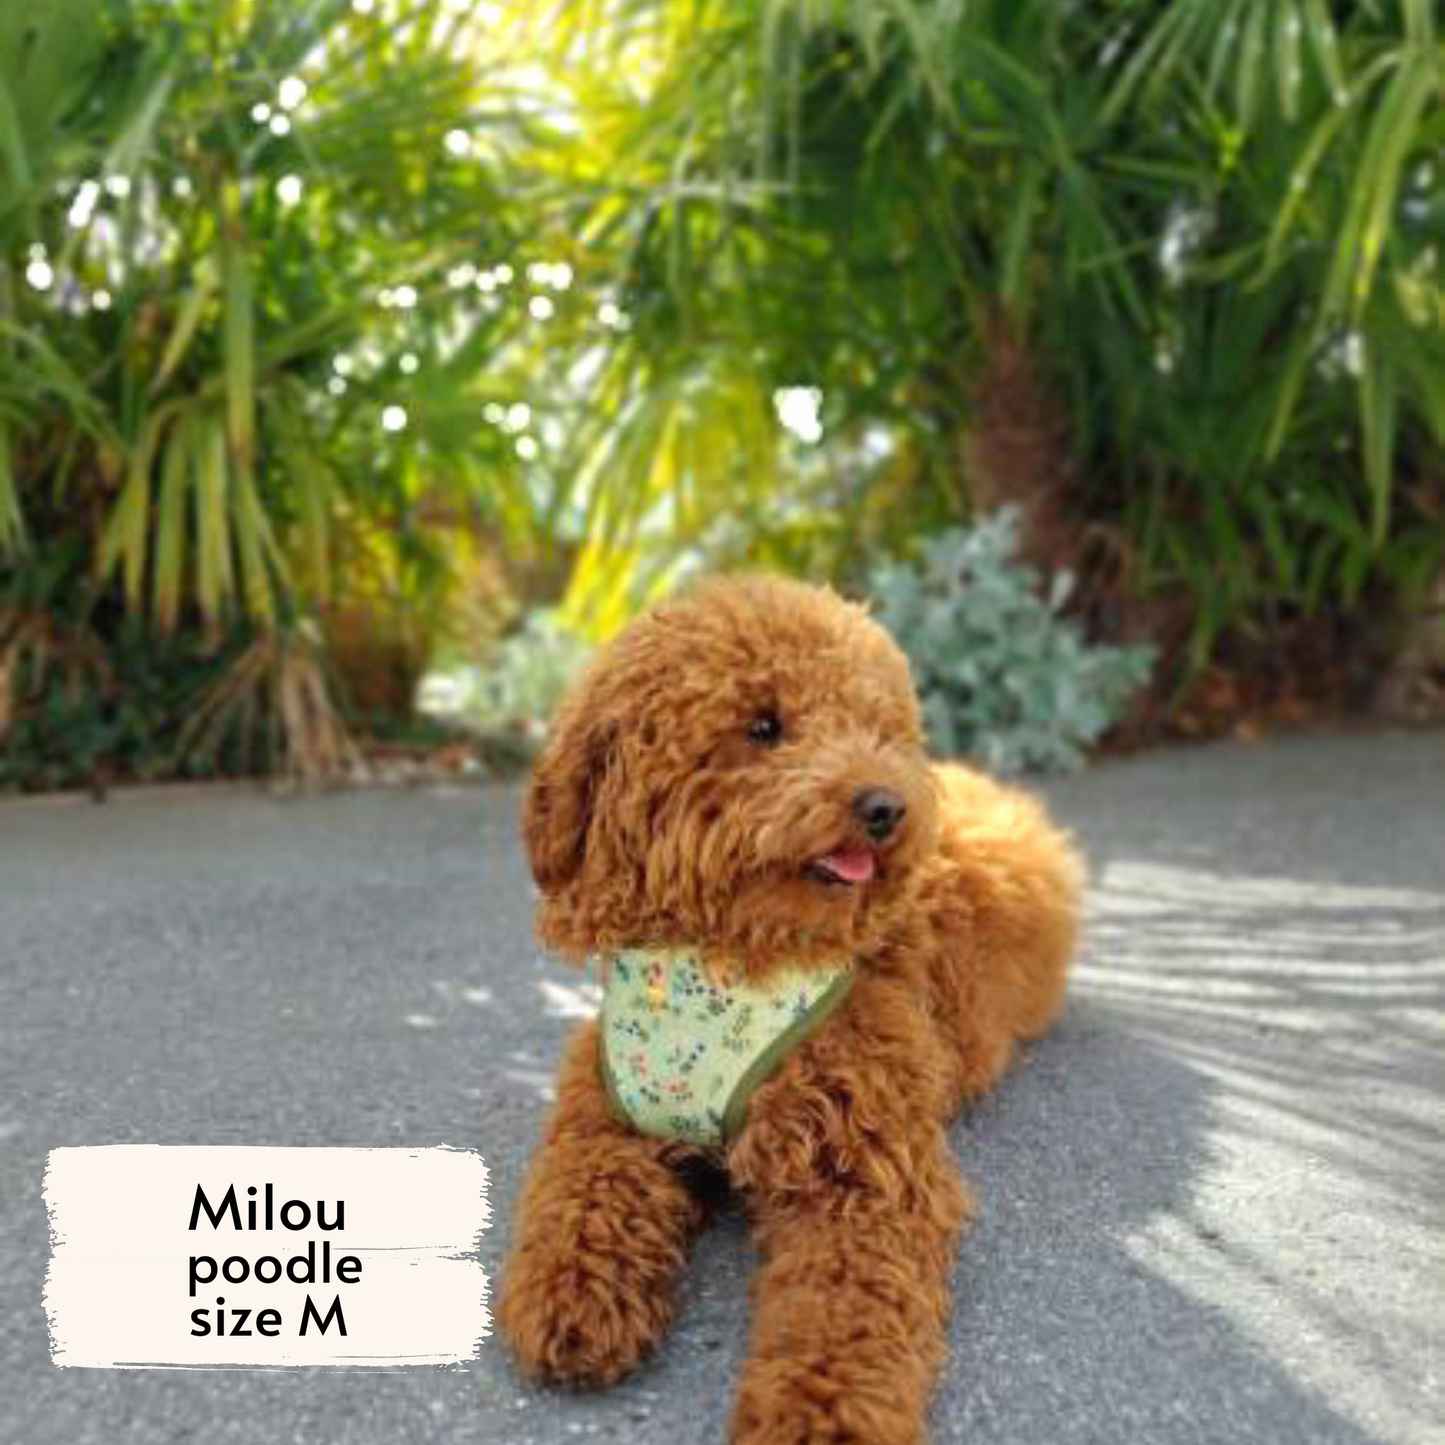 Milou, a poodle, wearing Pata Paw's Alpine Wildflowers harness (size M)